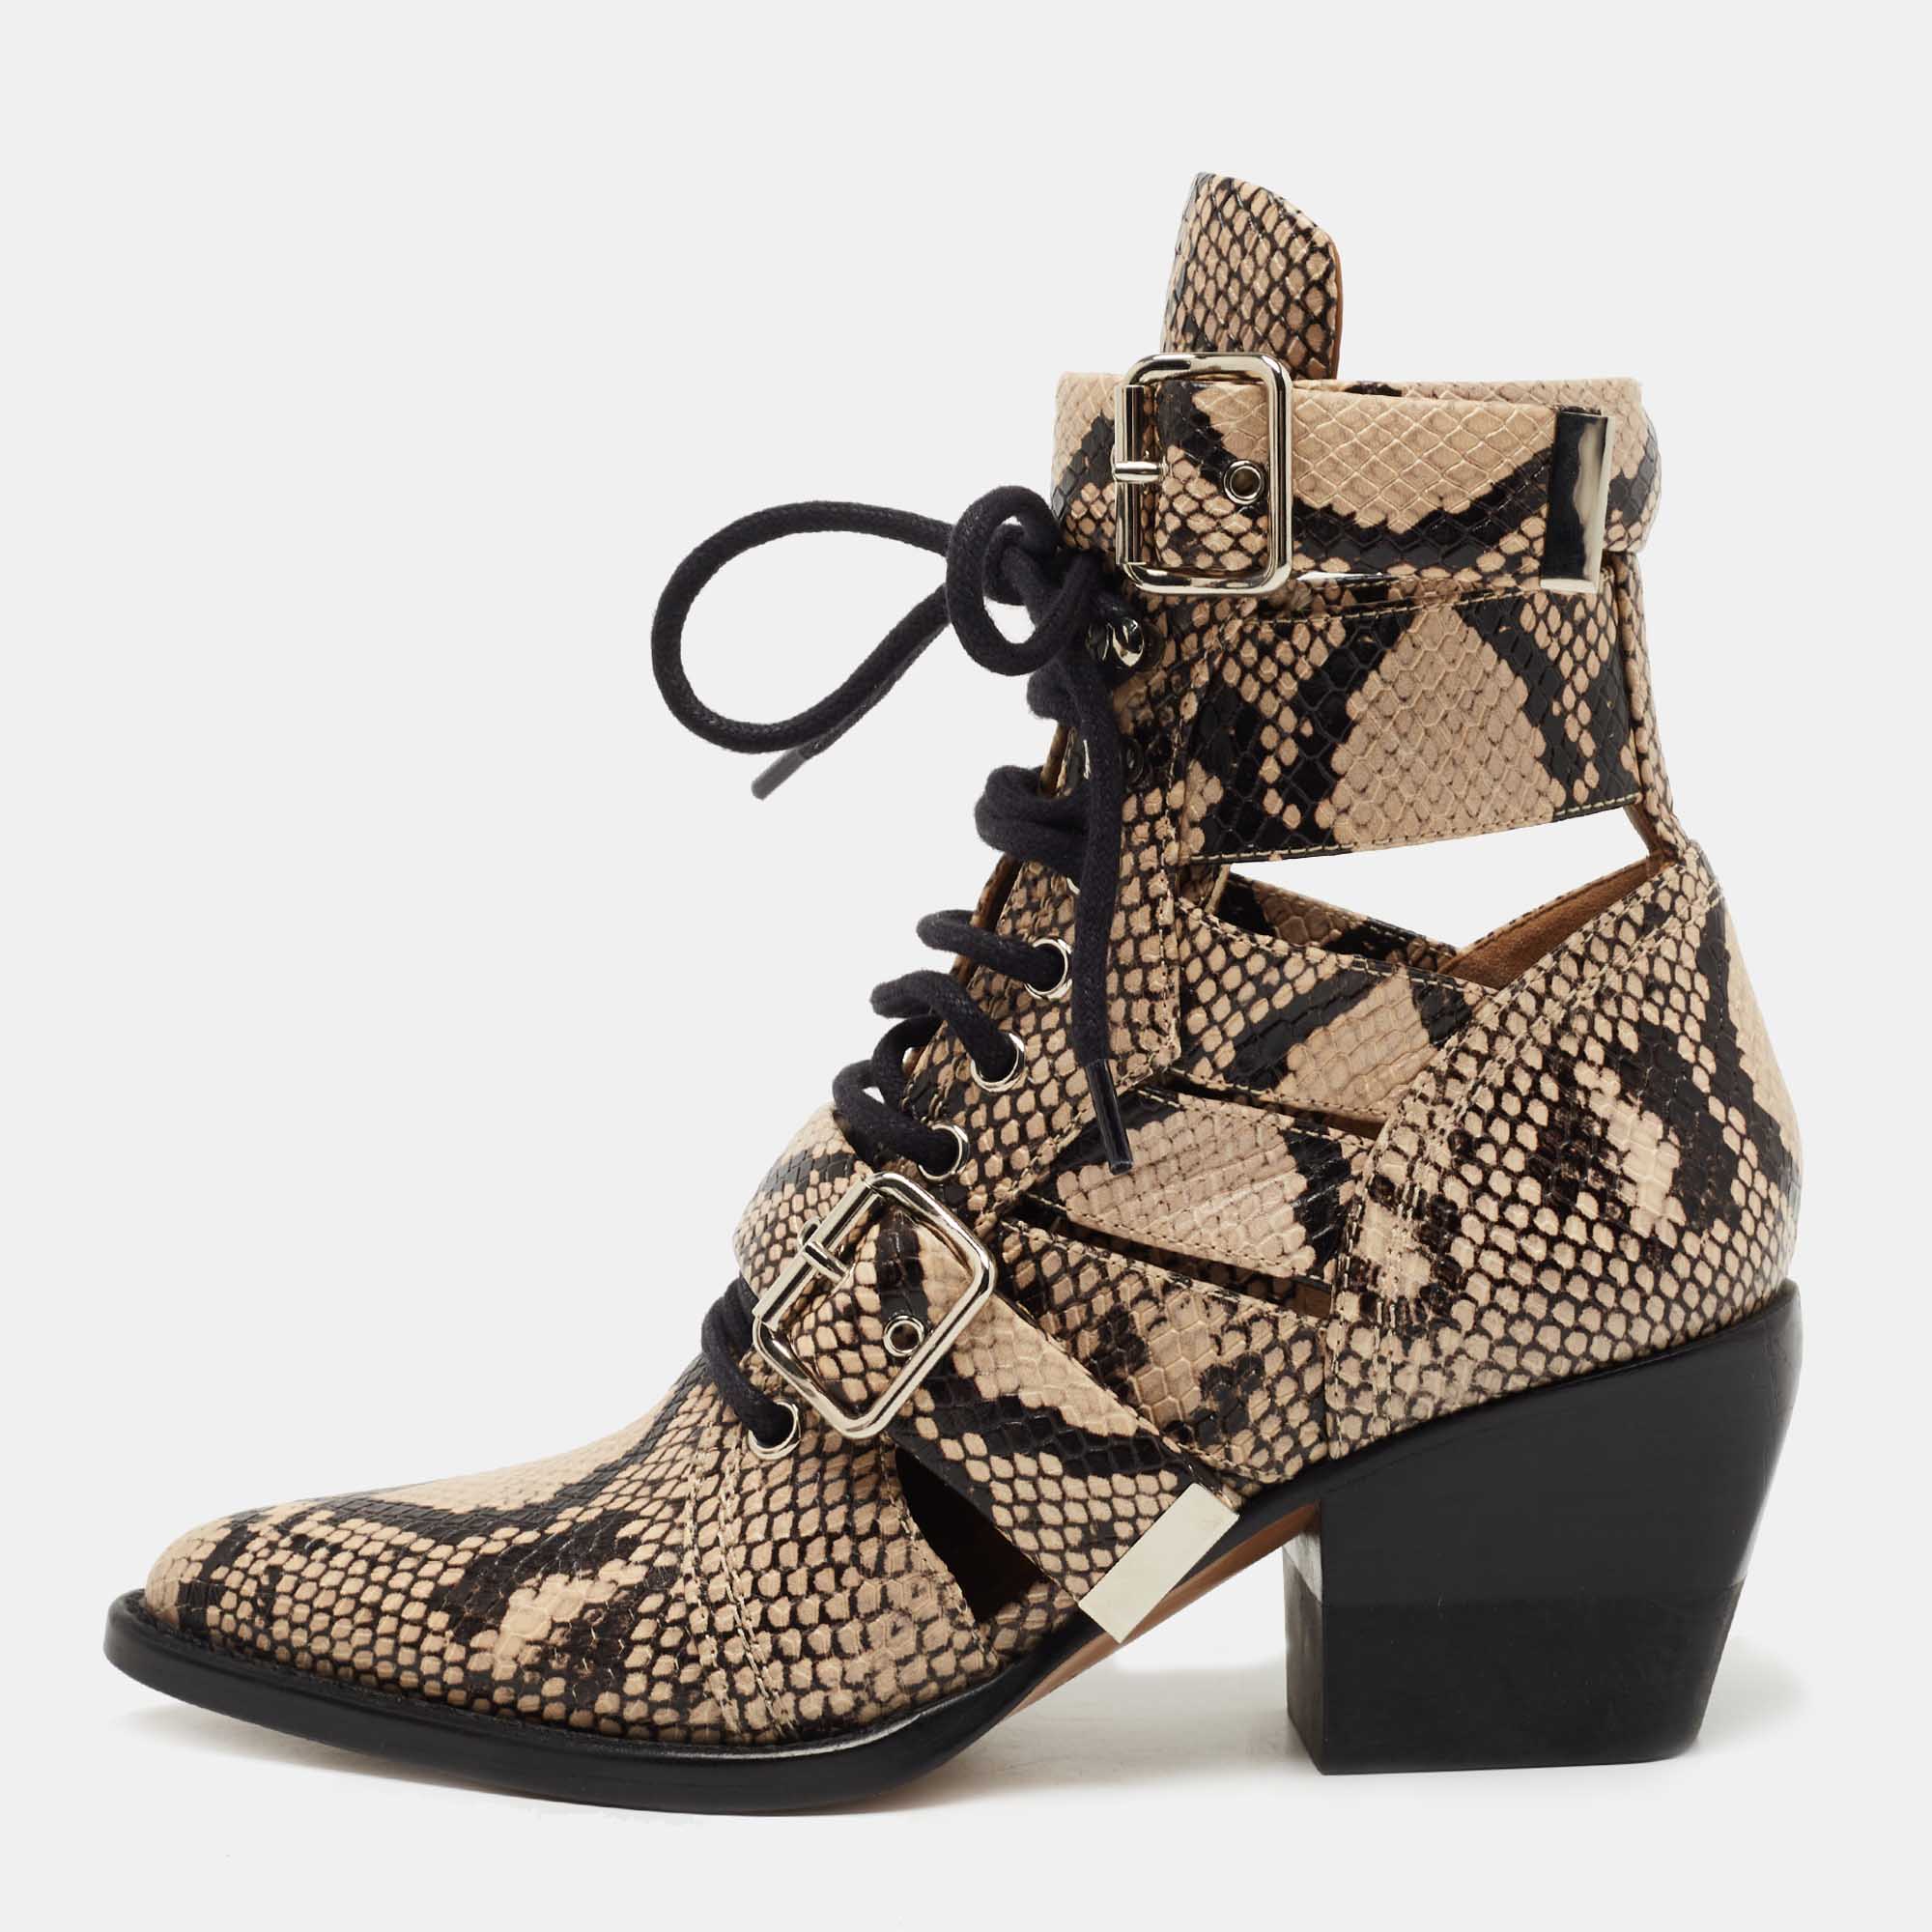 Chloe brown/black python embossed leather rylee ankle boots size 36